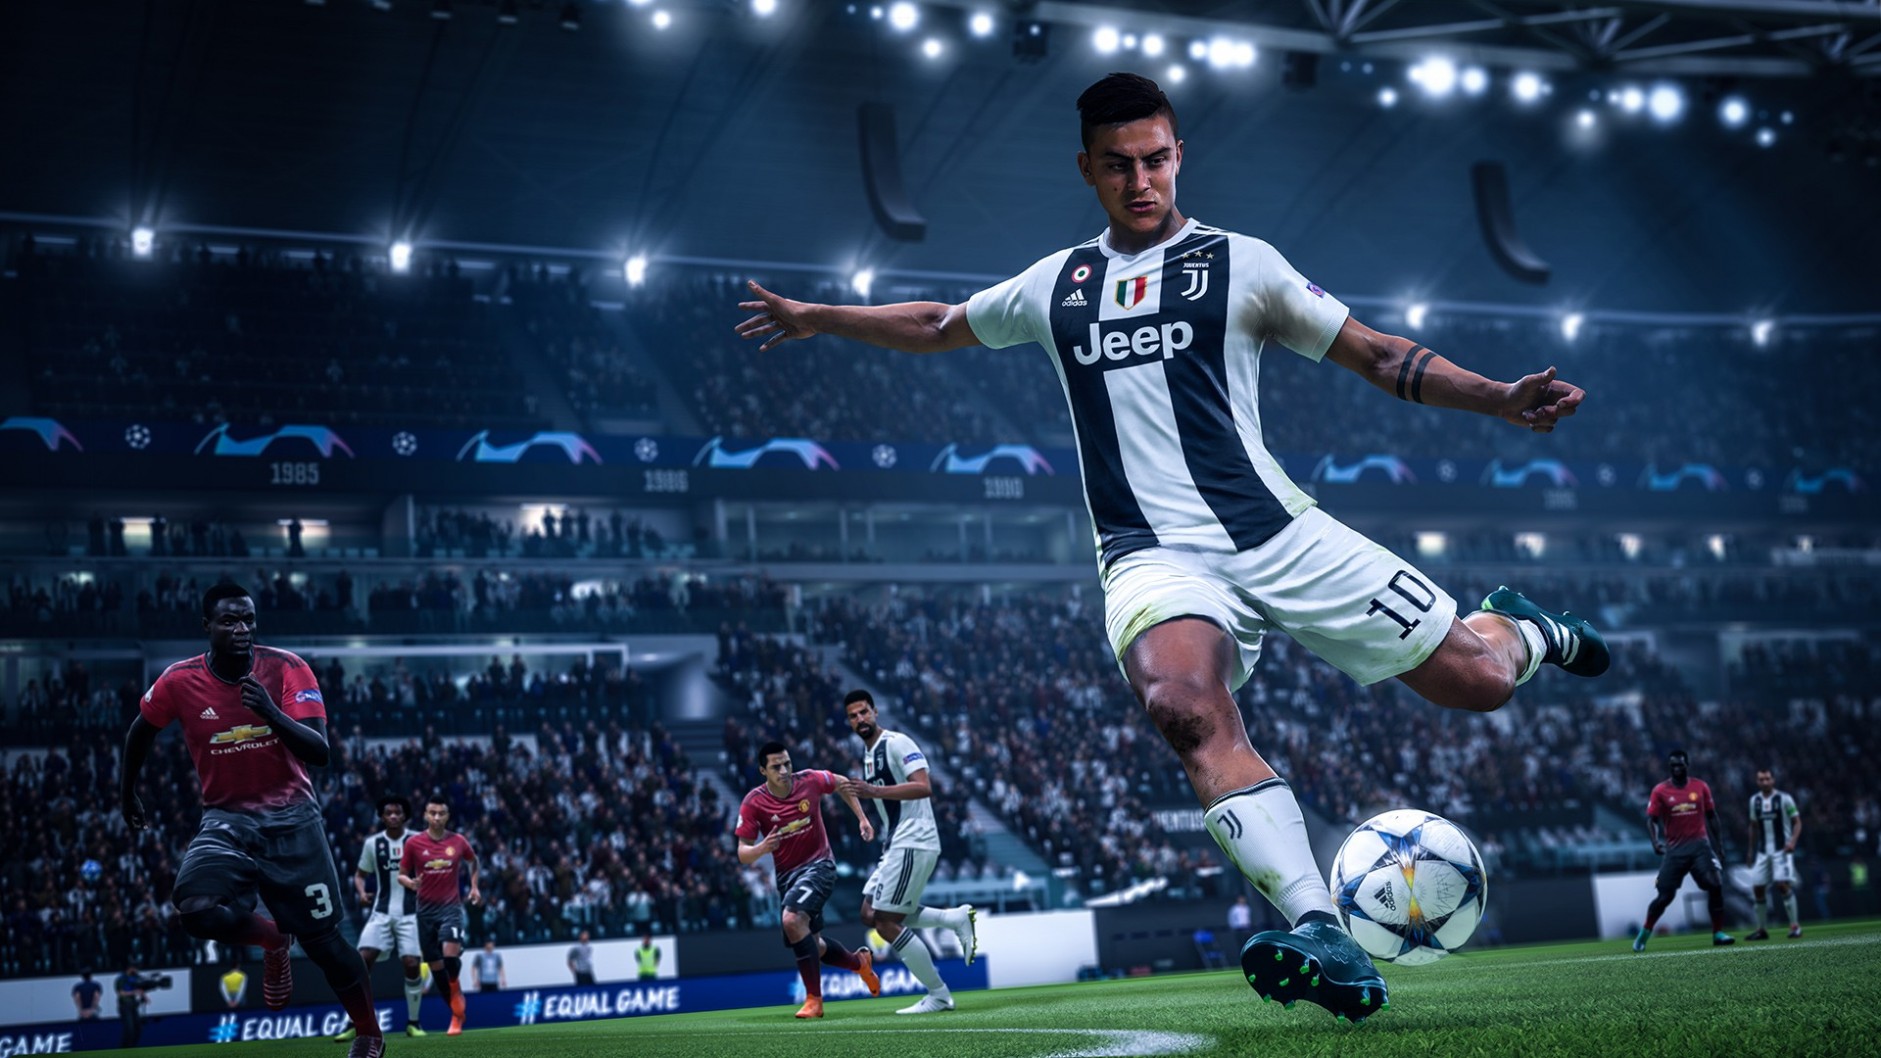 FIFA 19 Incl Update 4 Free Download